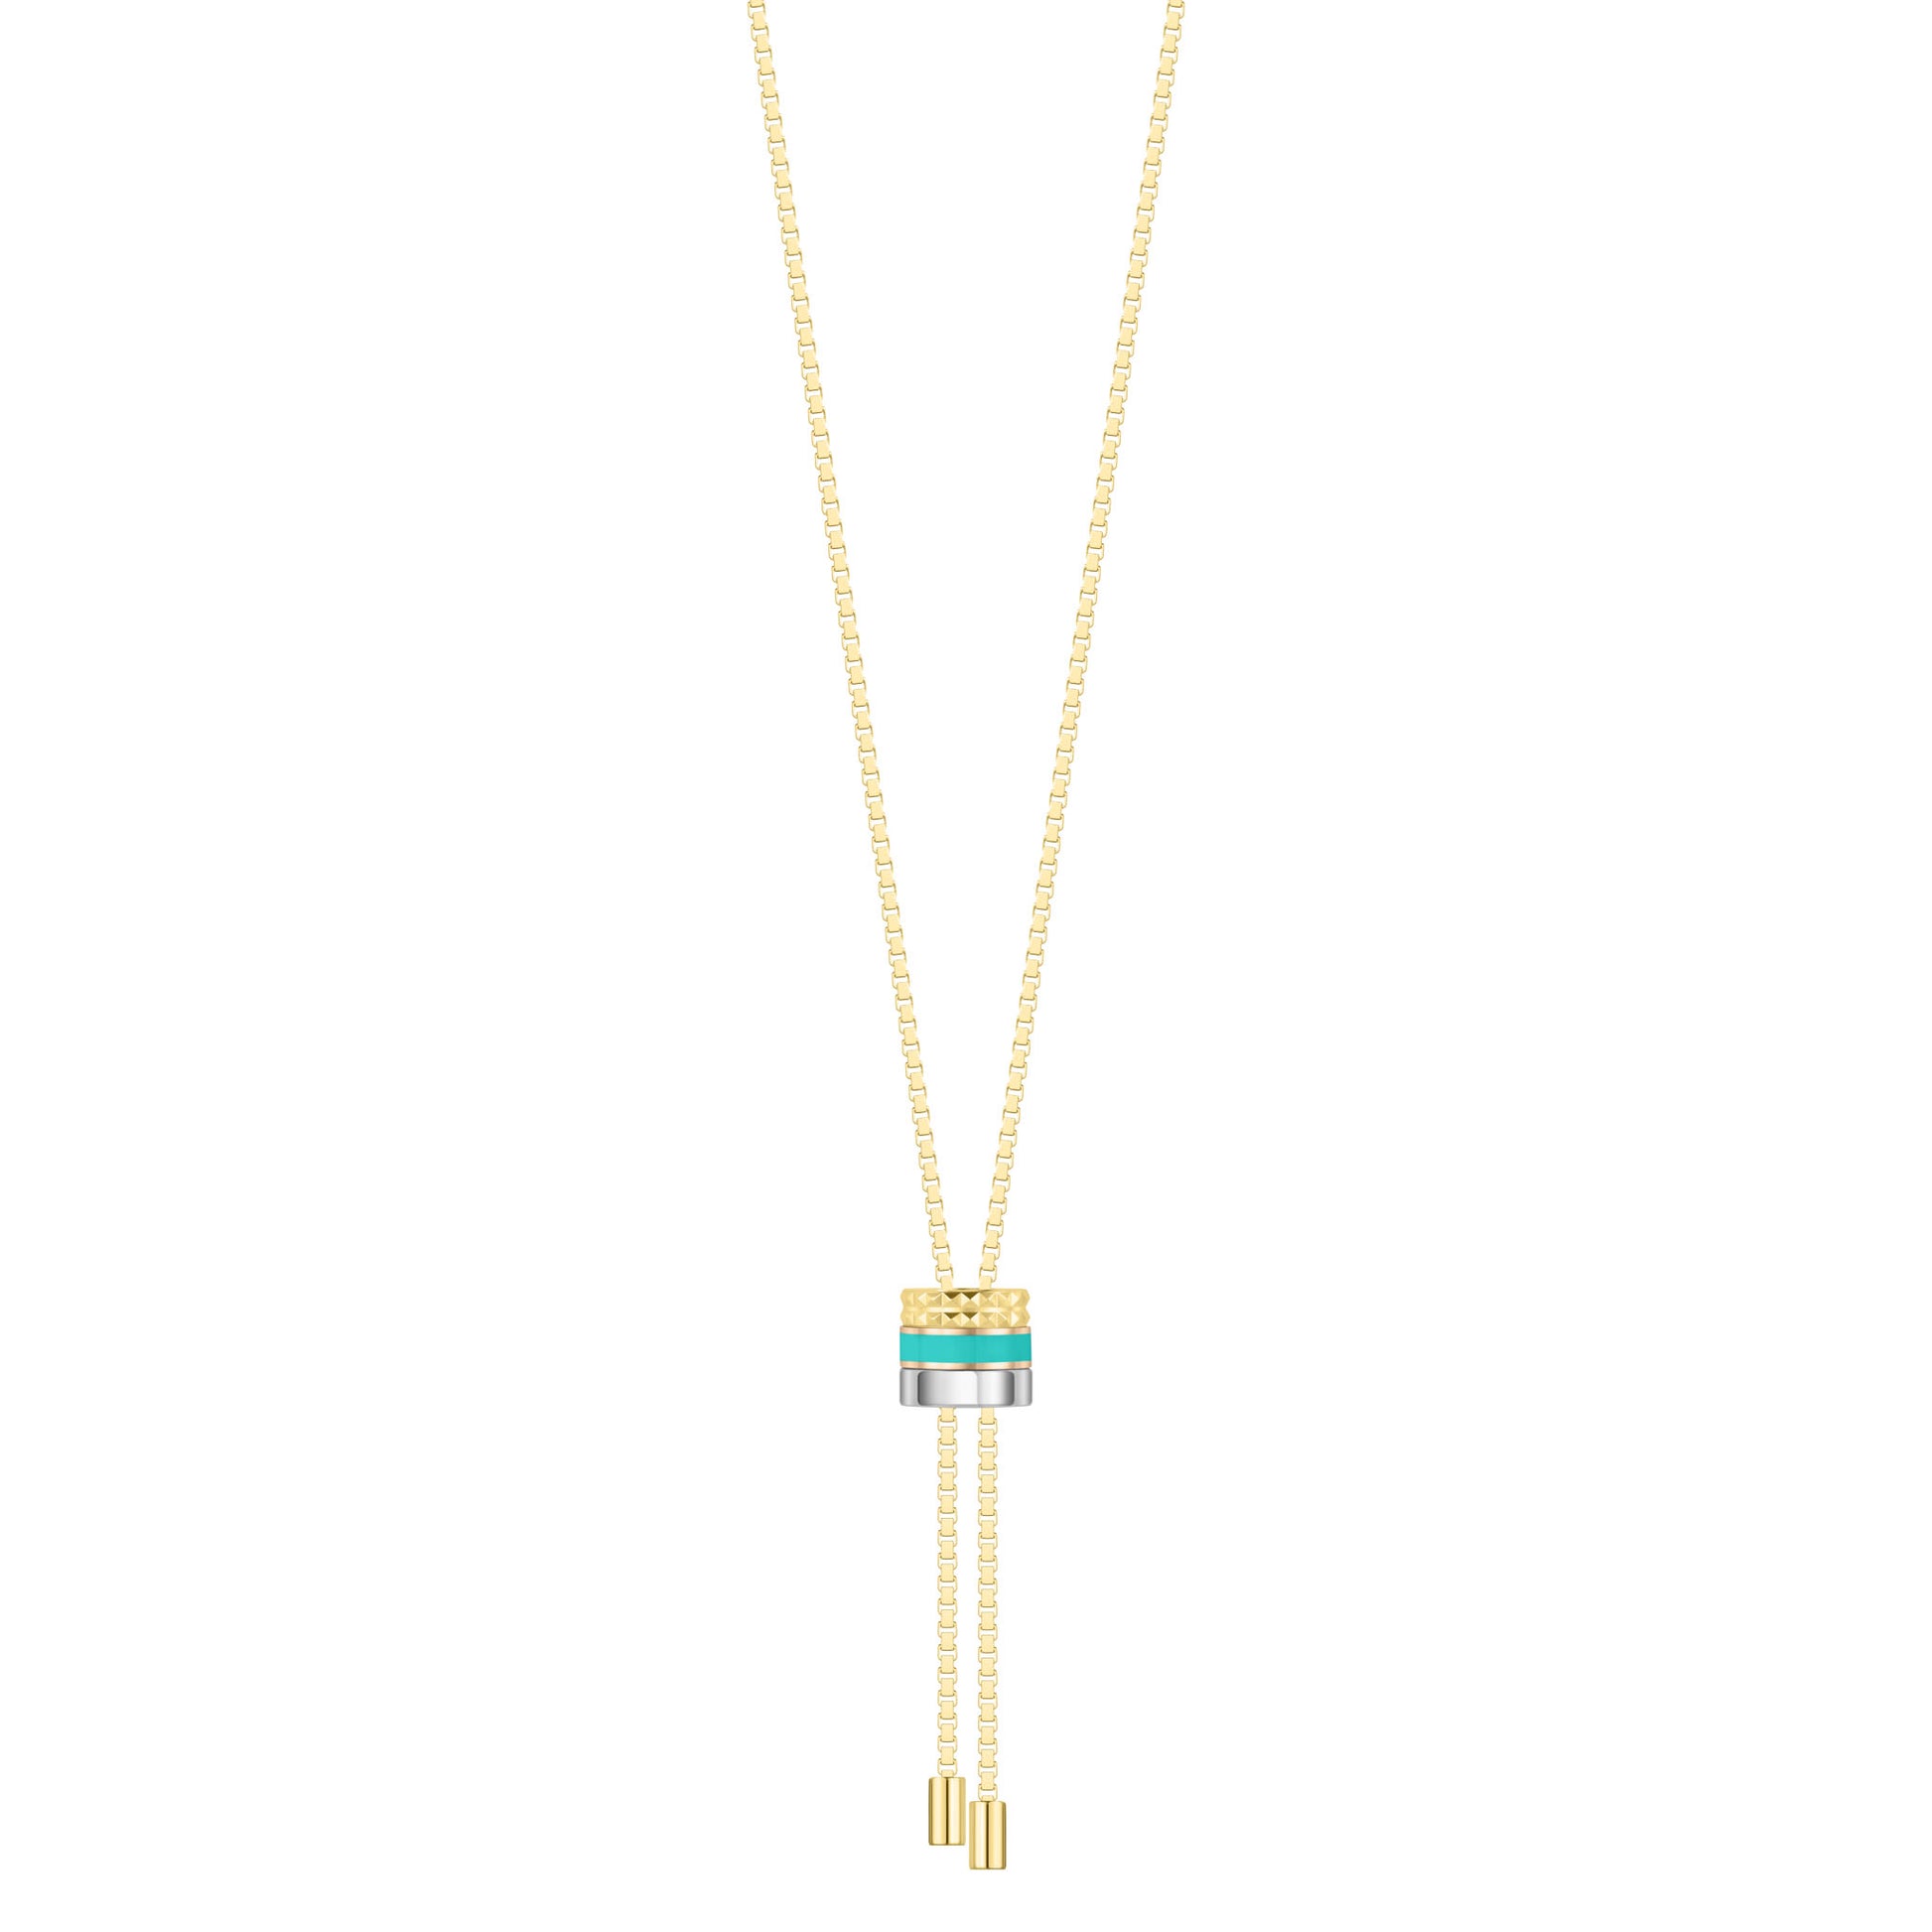 WEWA BOLO TIE TUBE TURQUOISE CHIP NECKLACE